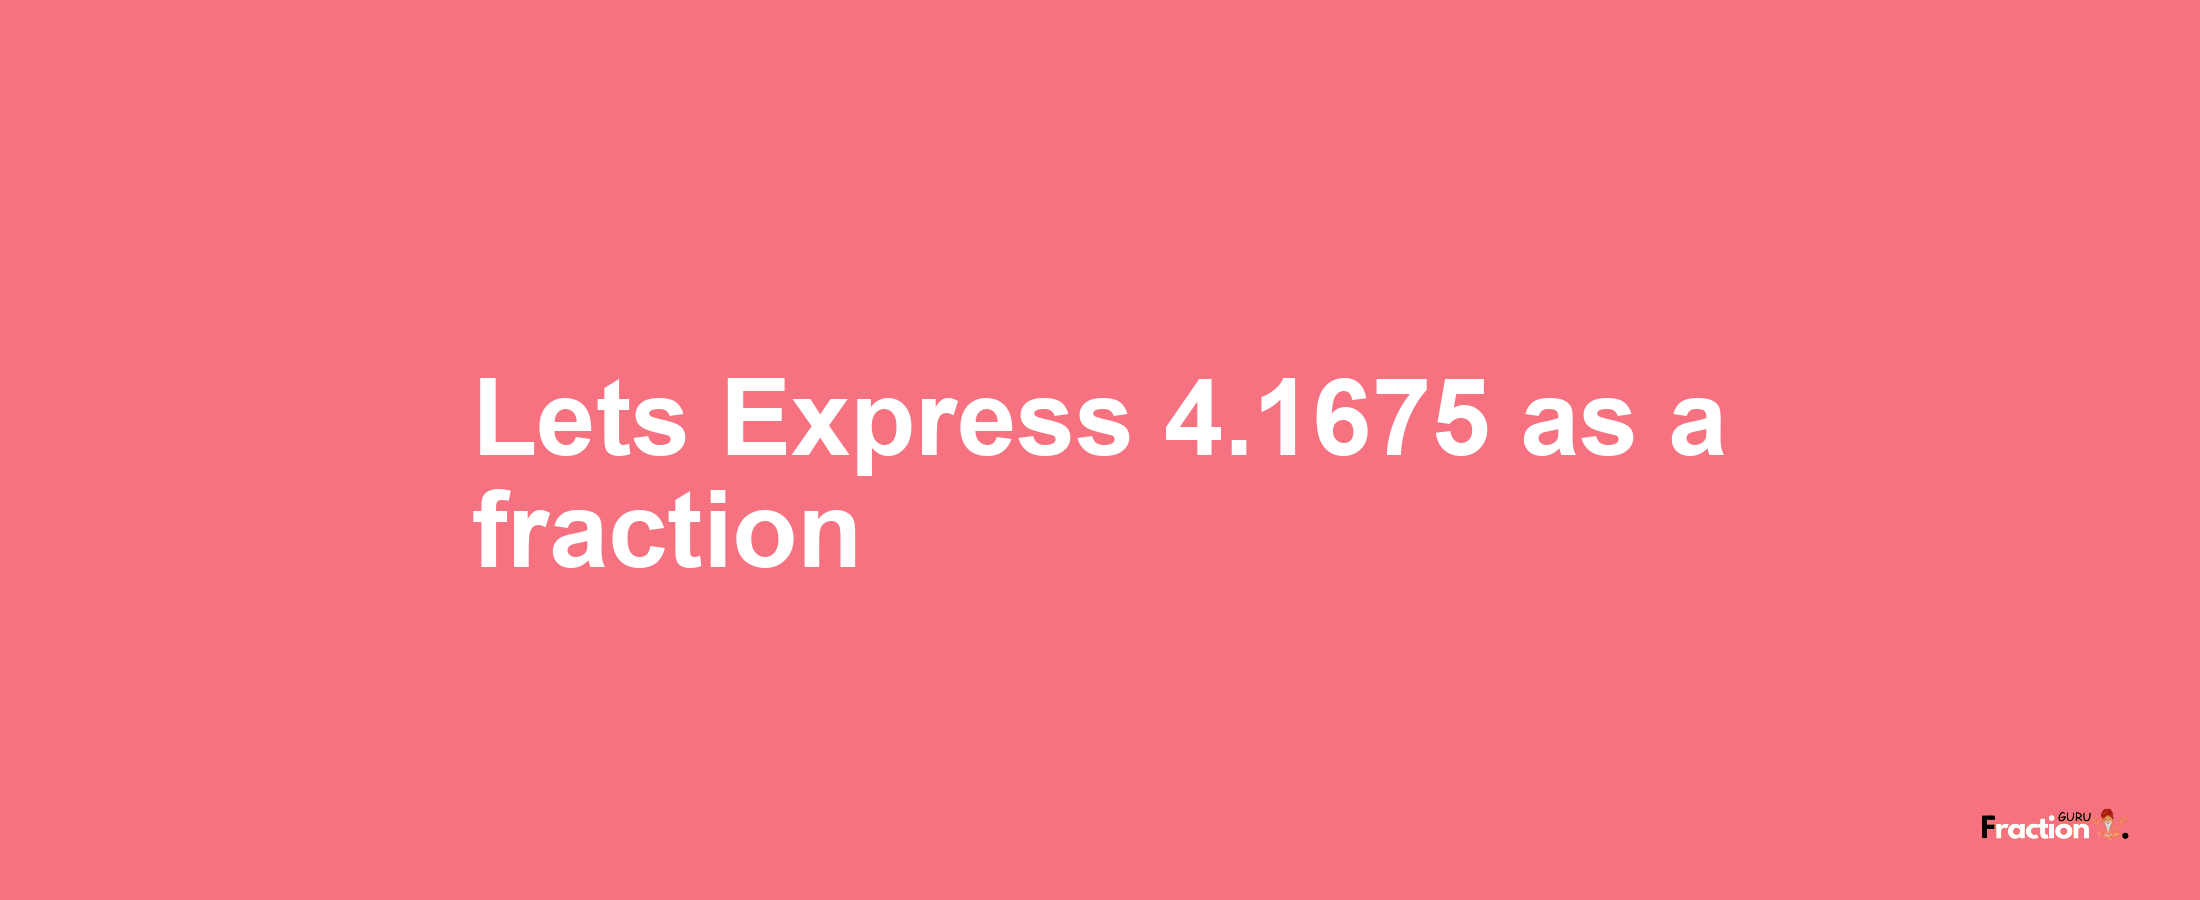 Lets Express 4.1675 as afraction